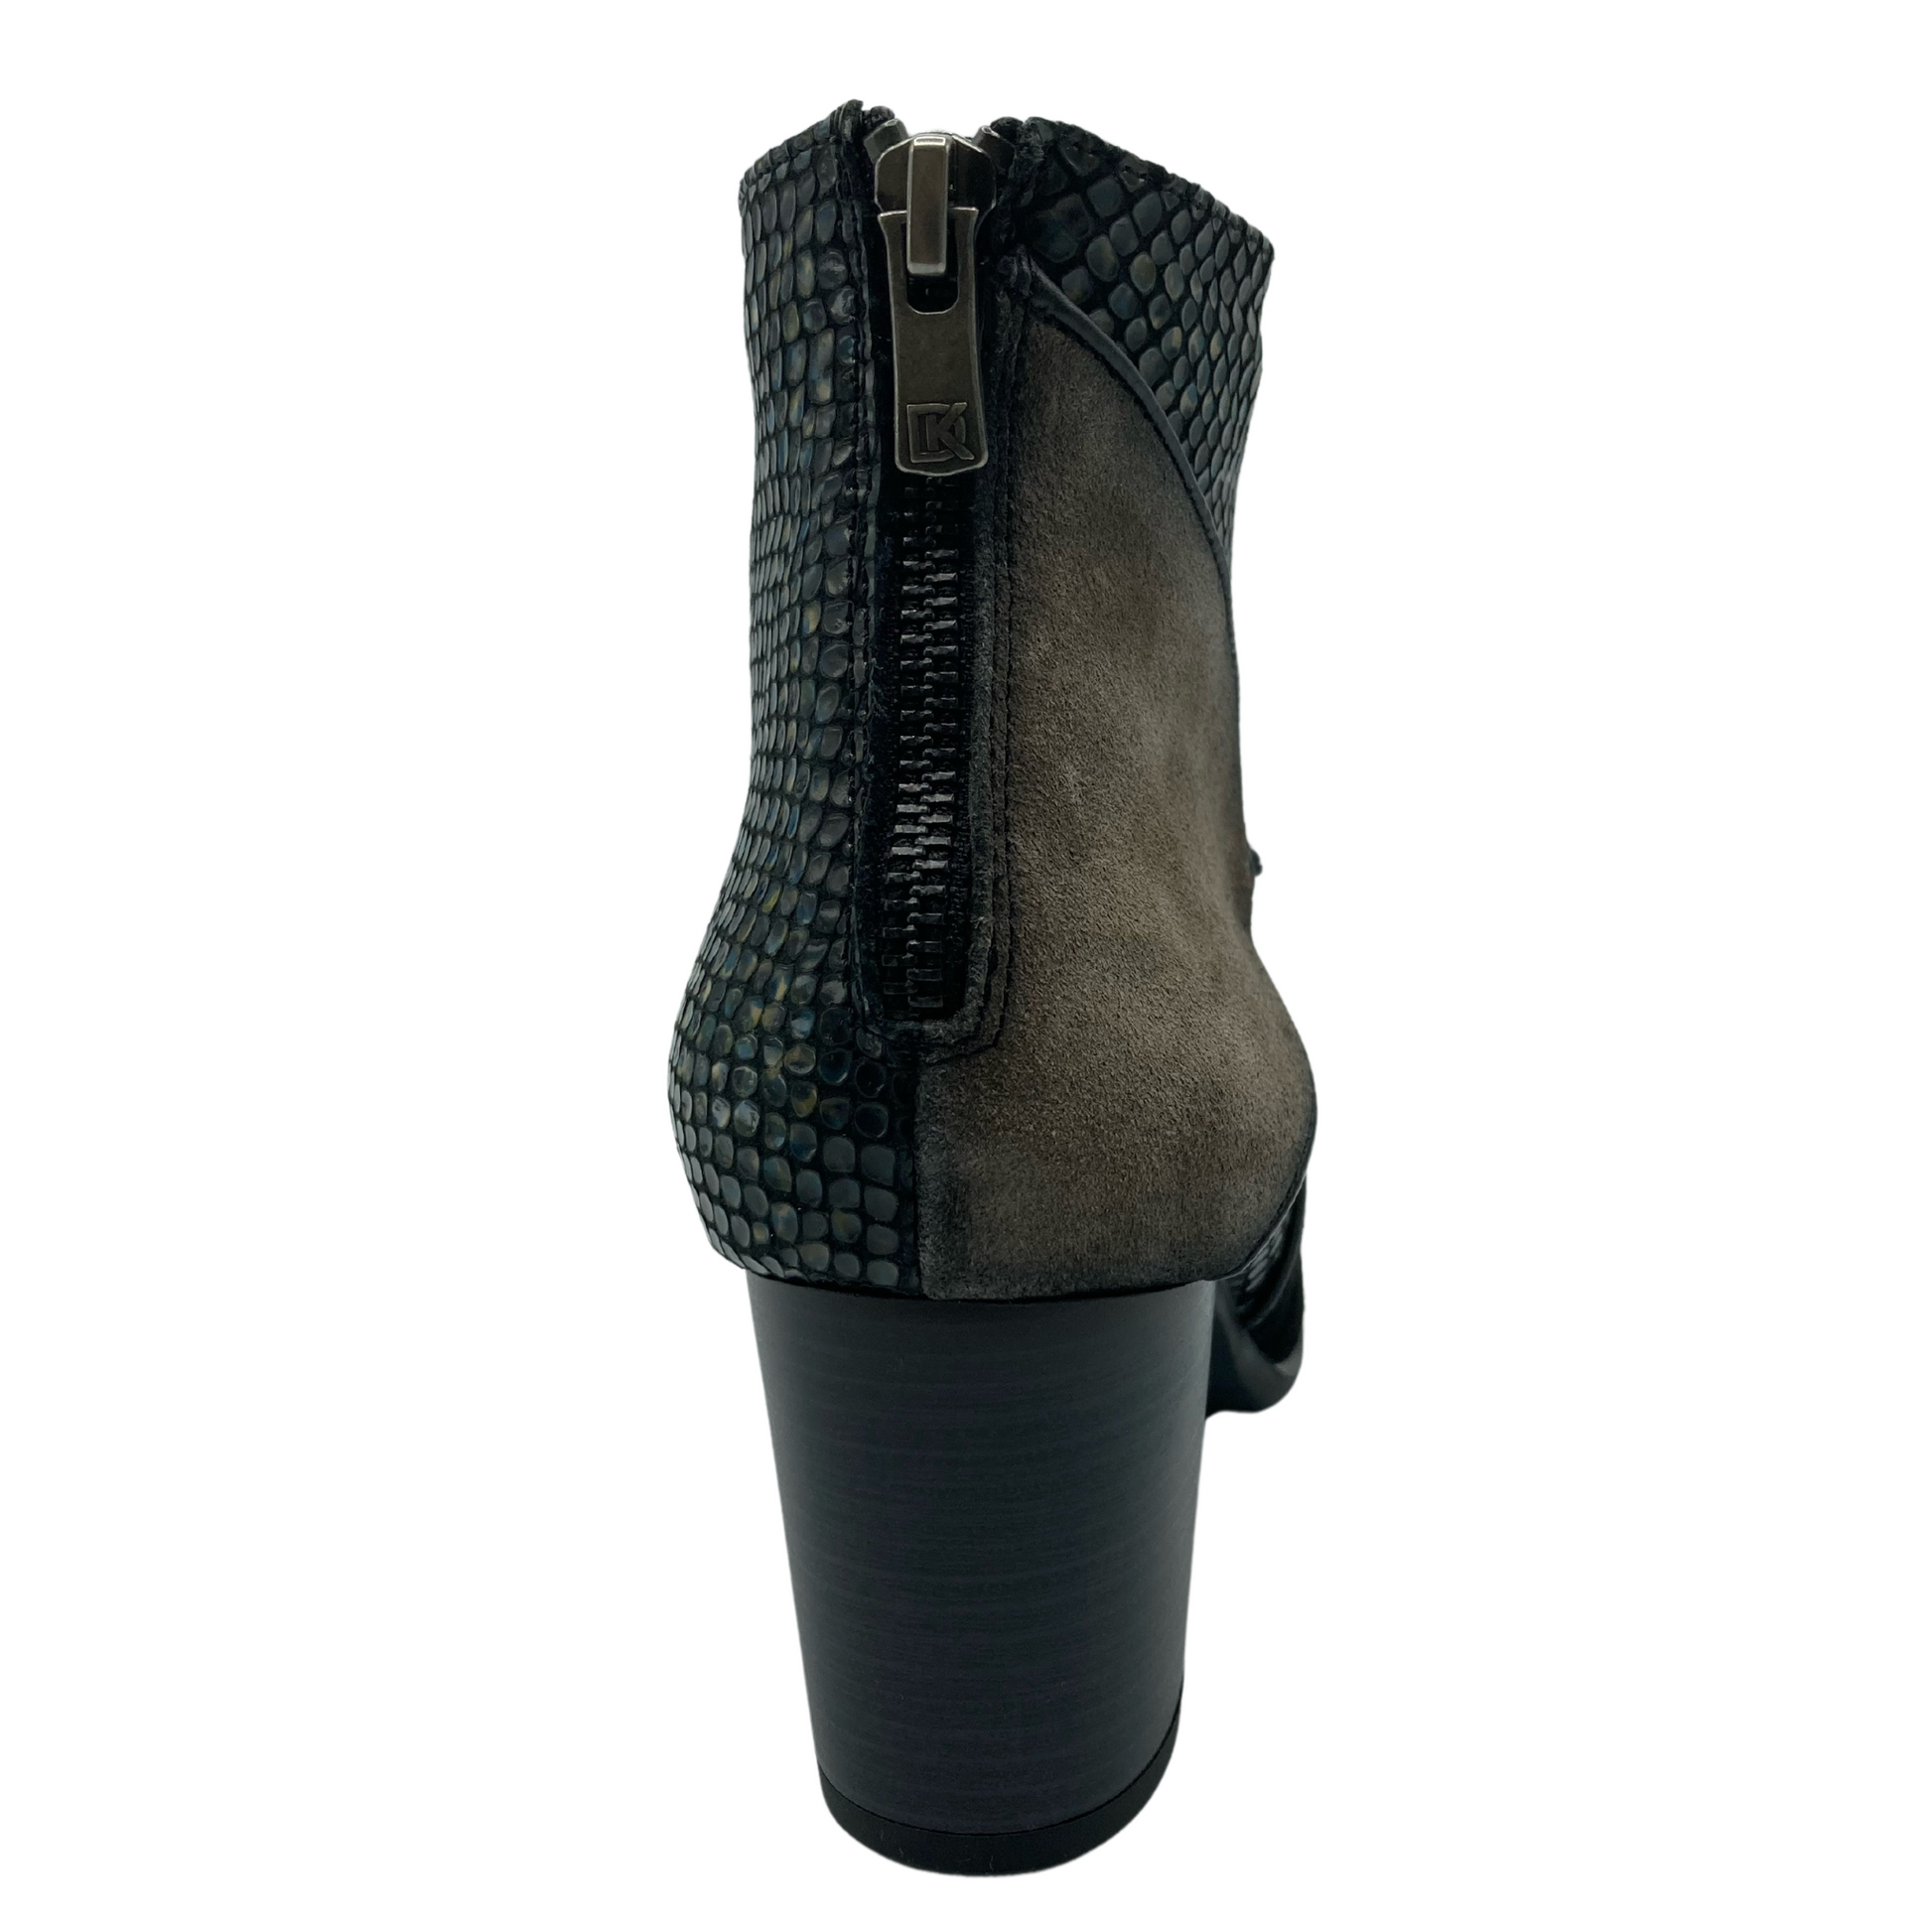 Back view of ankle boot with back zipper closure and block heel